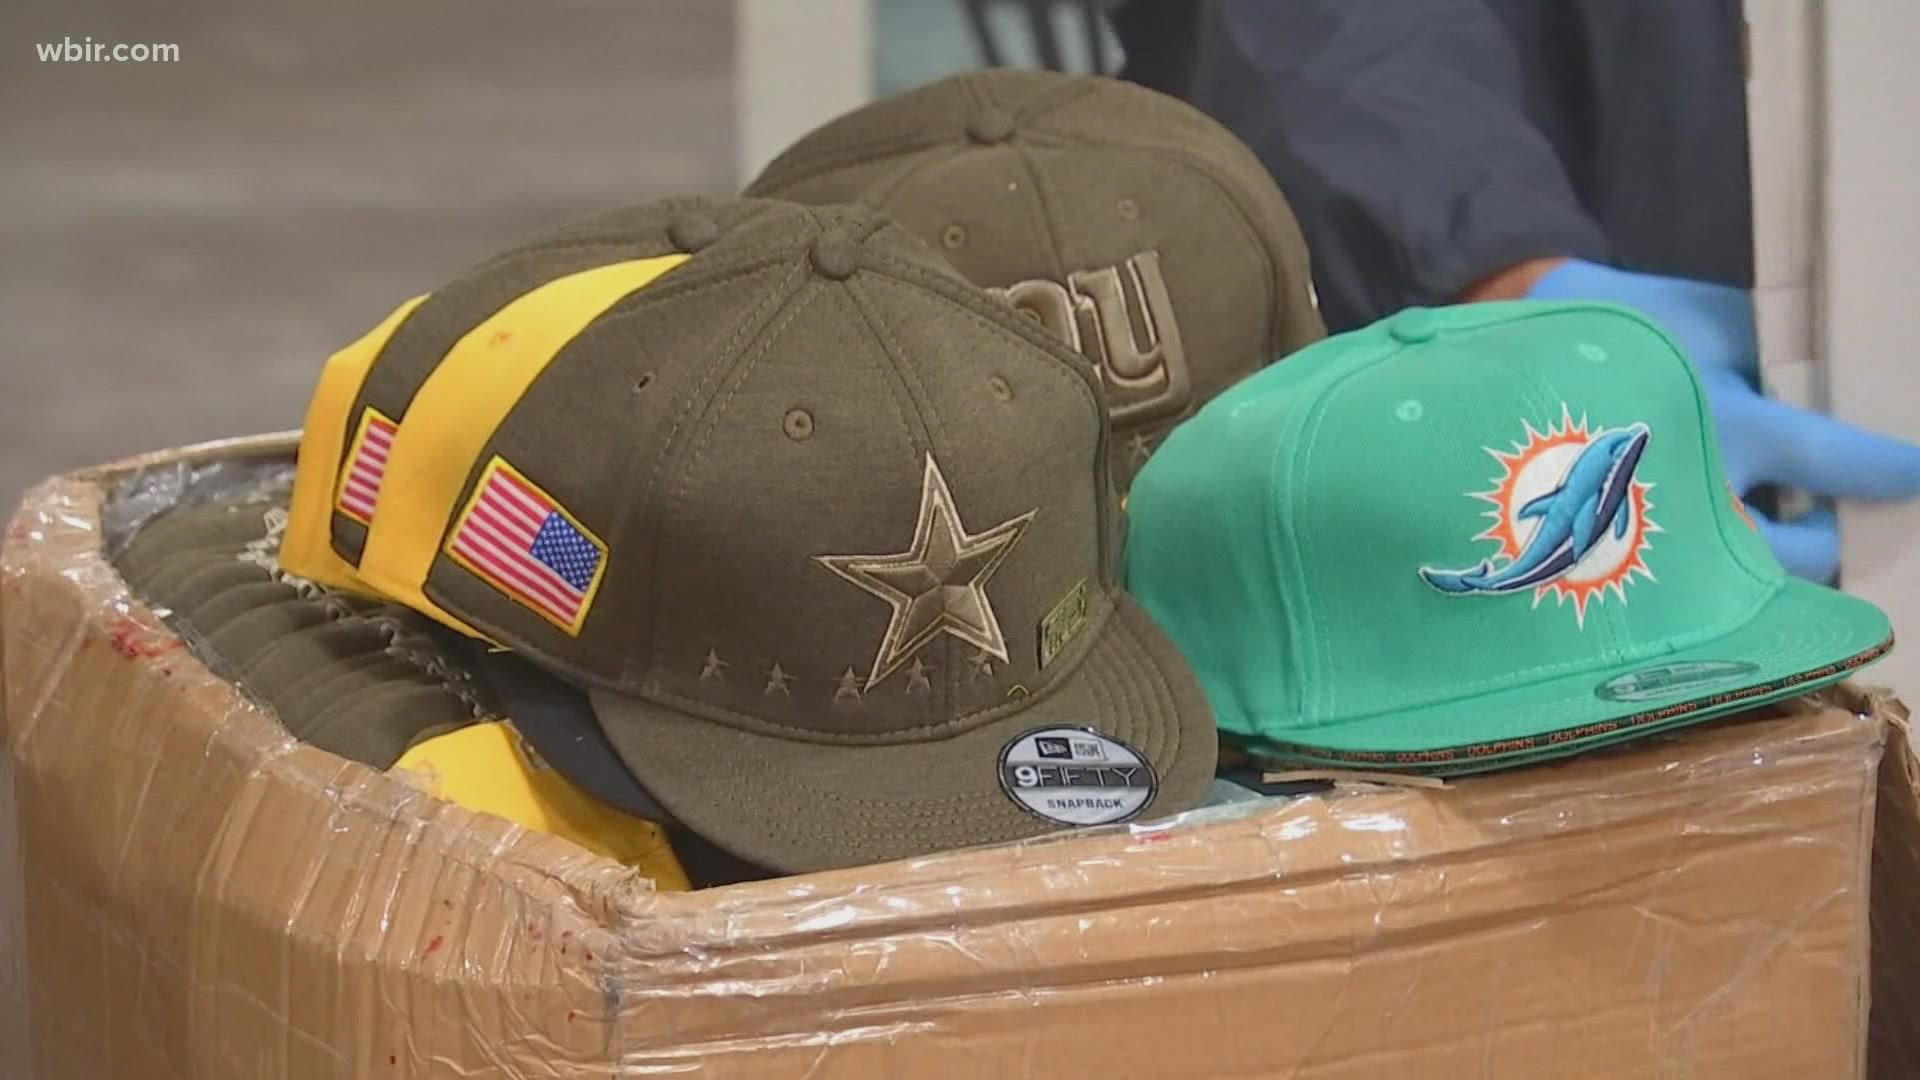 Officials warn people to avoid purchasing fake NFL gear